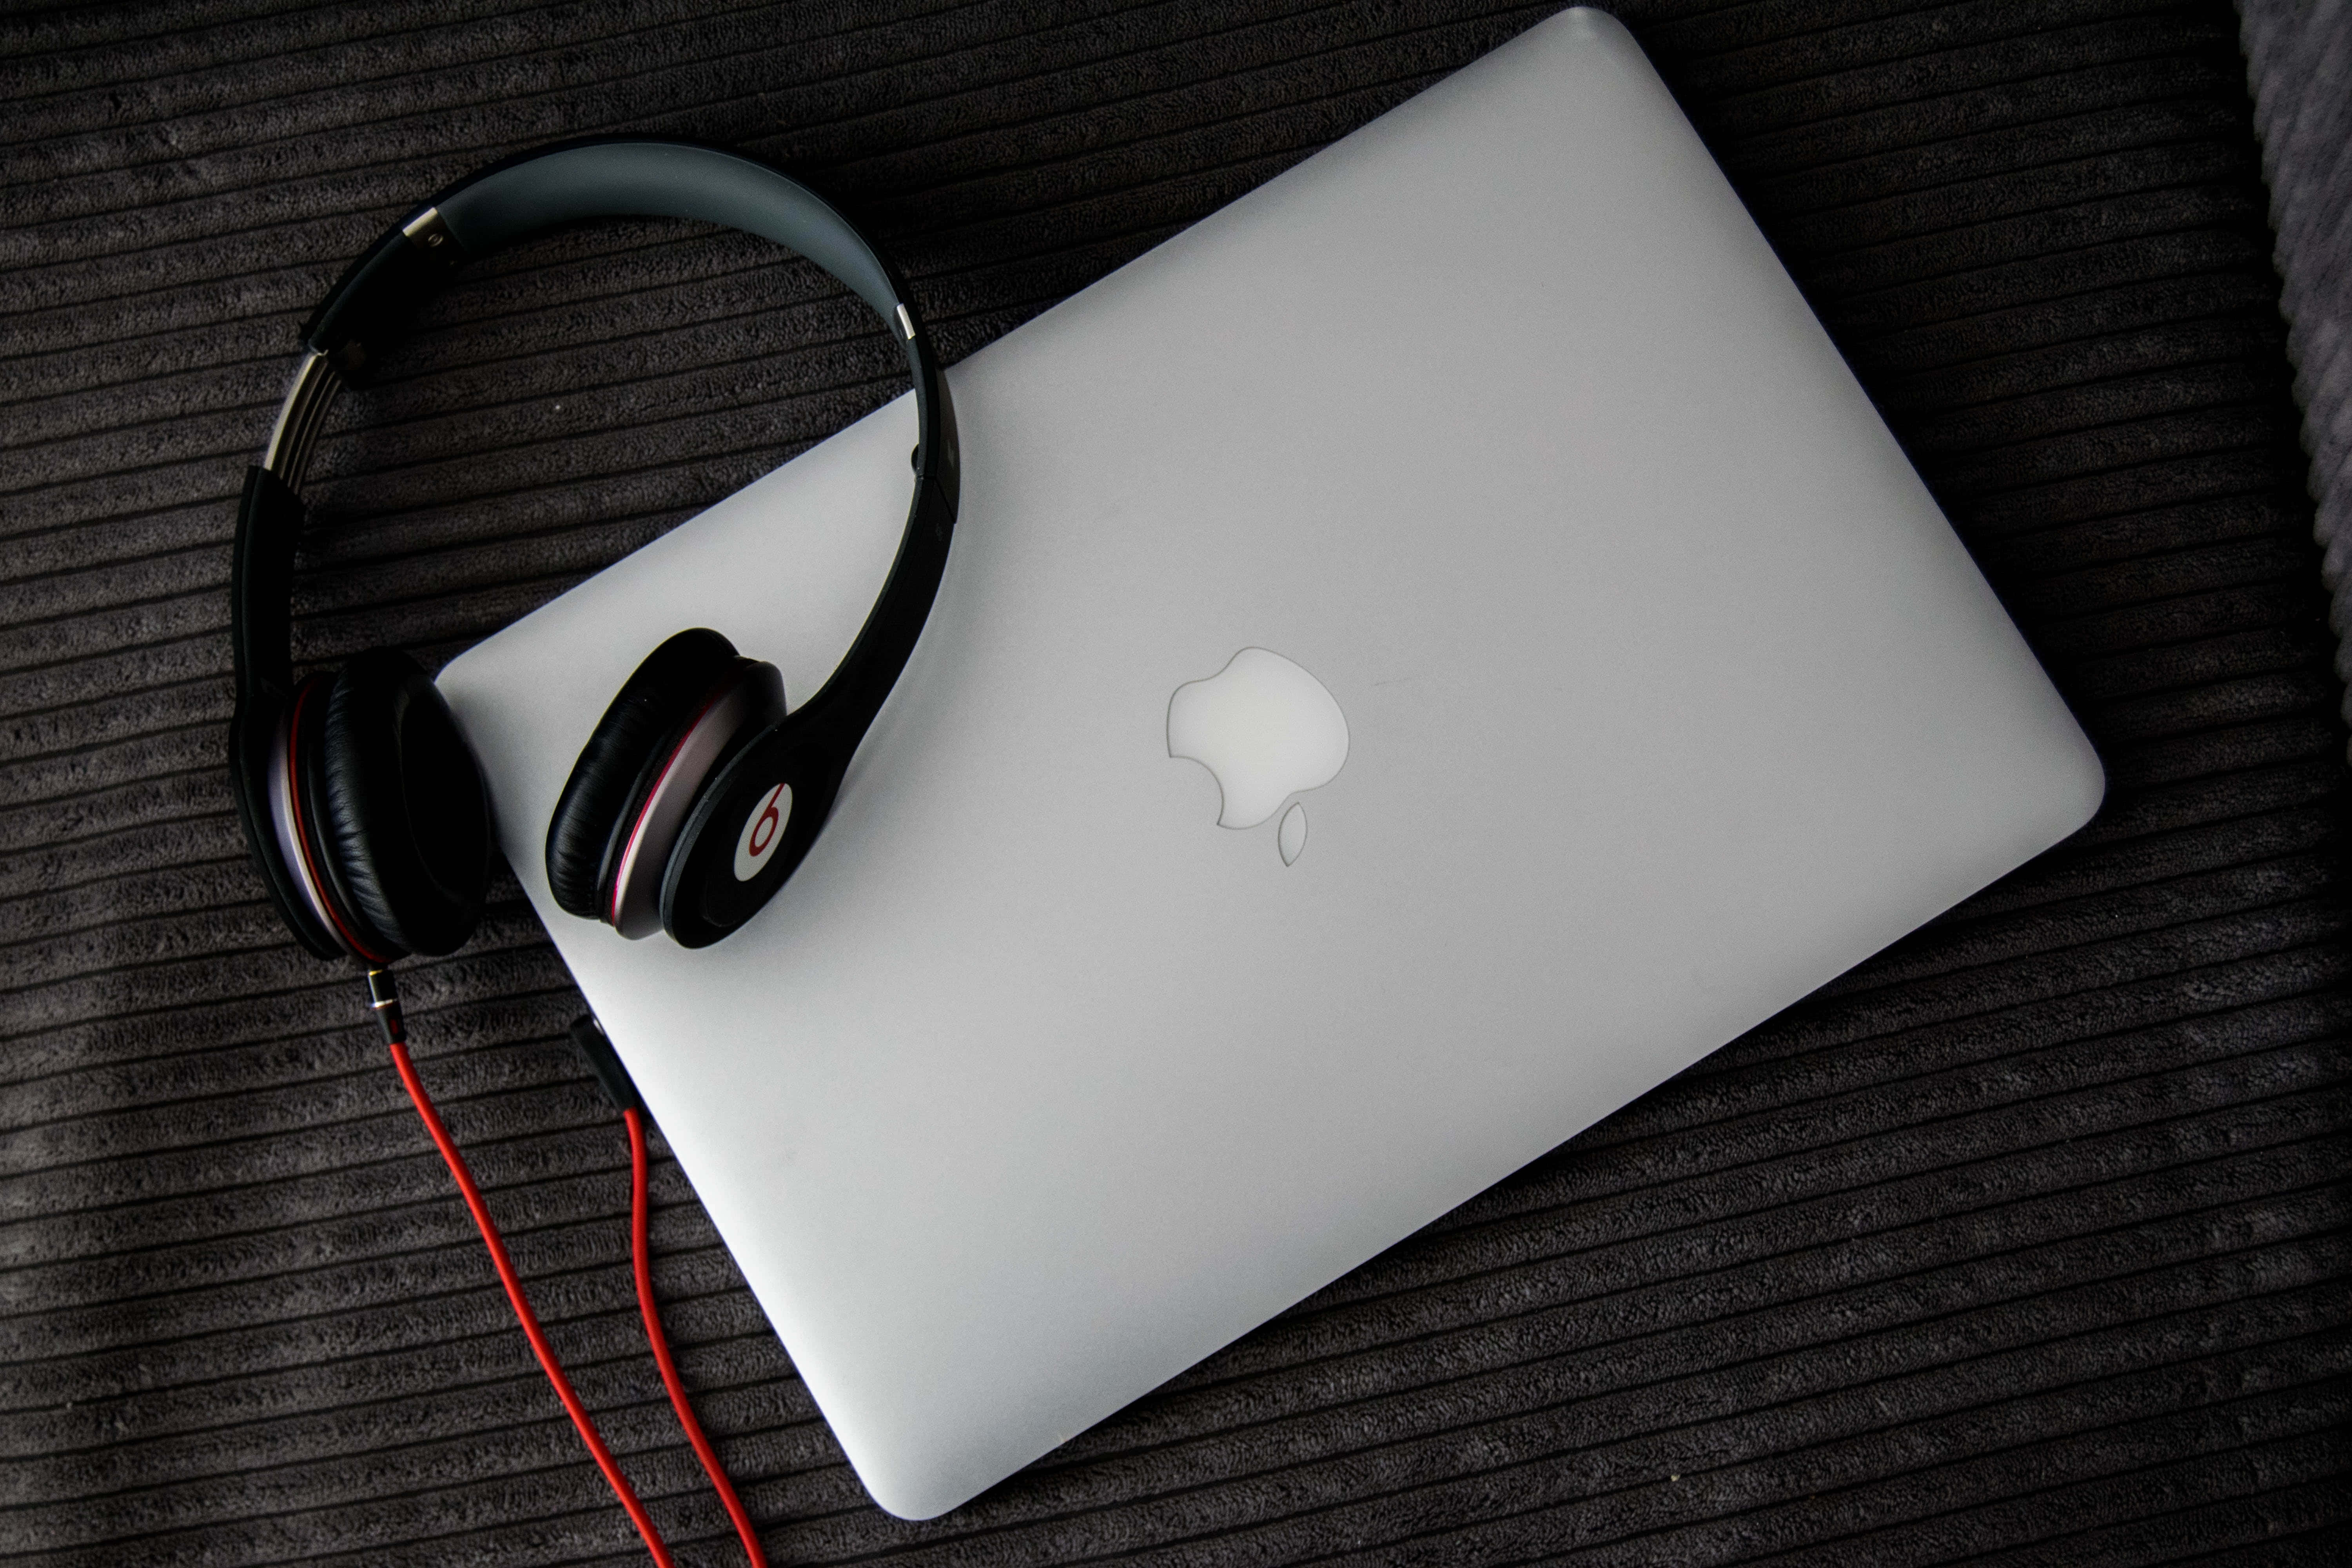 "Stay In The Zone – Listen to Music While Working On Your Laptop" Wallpaper